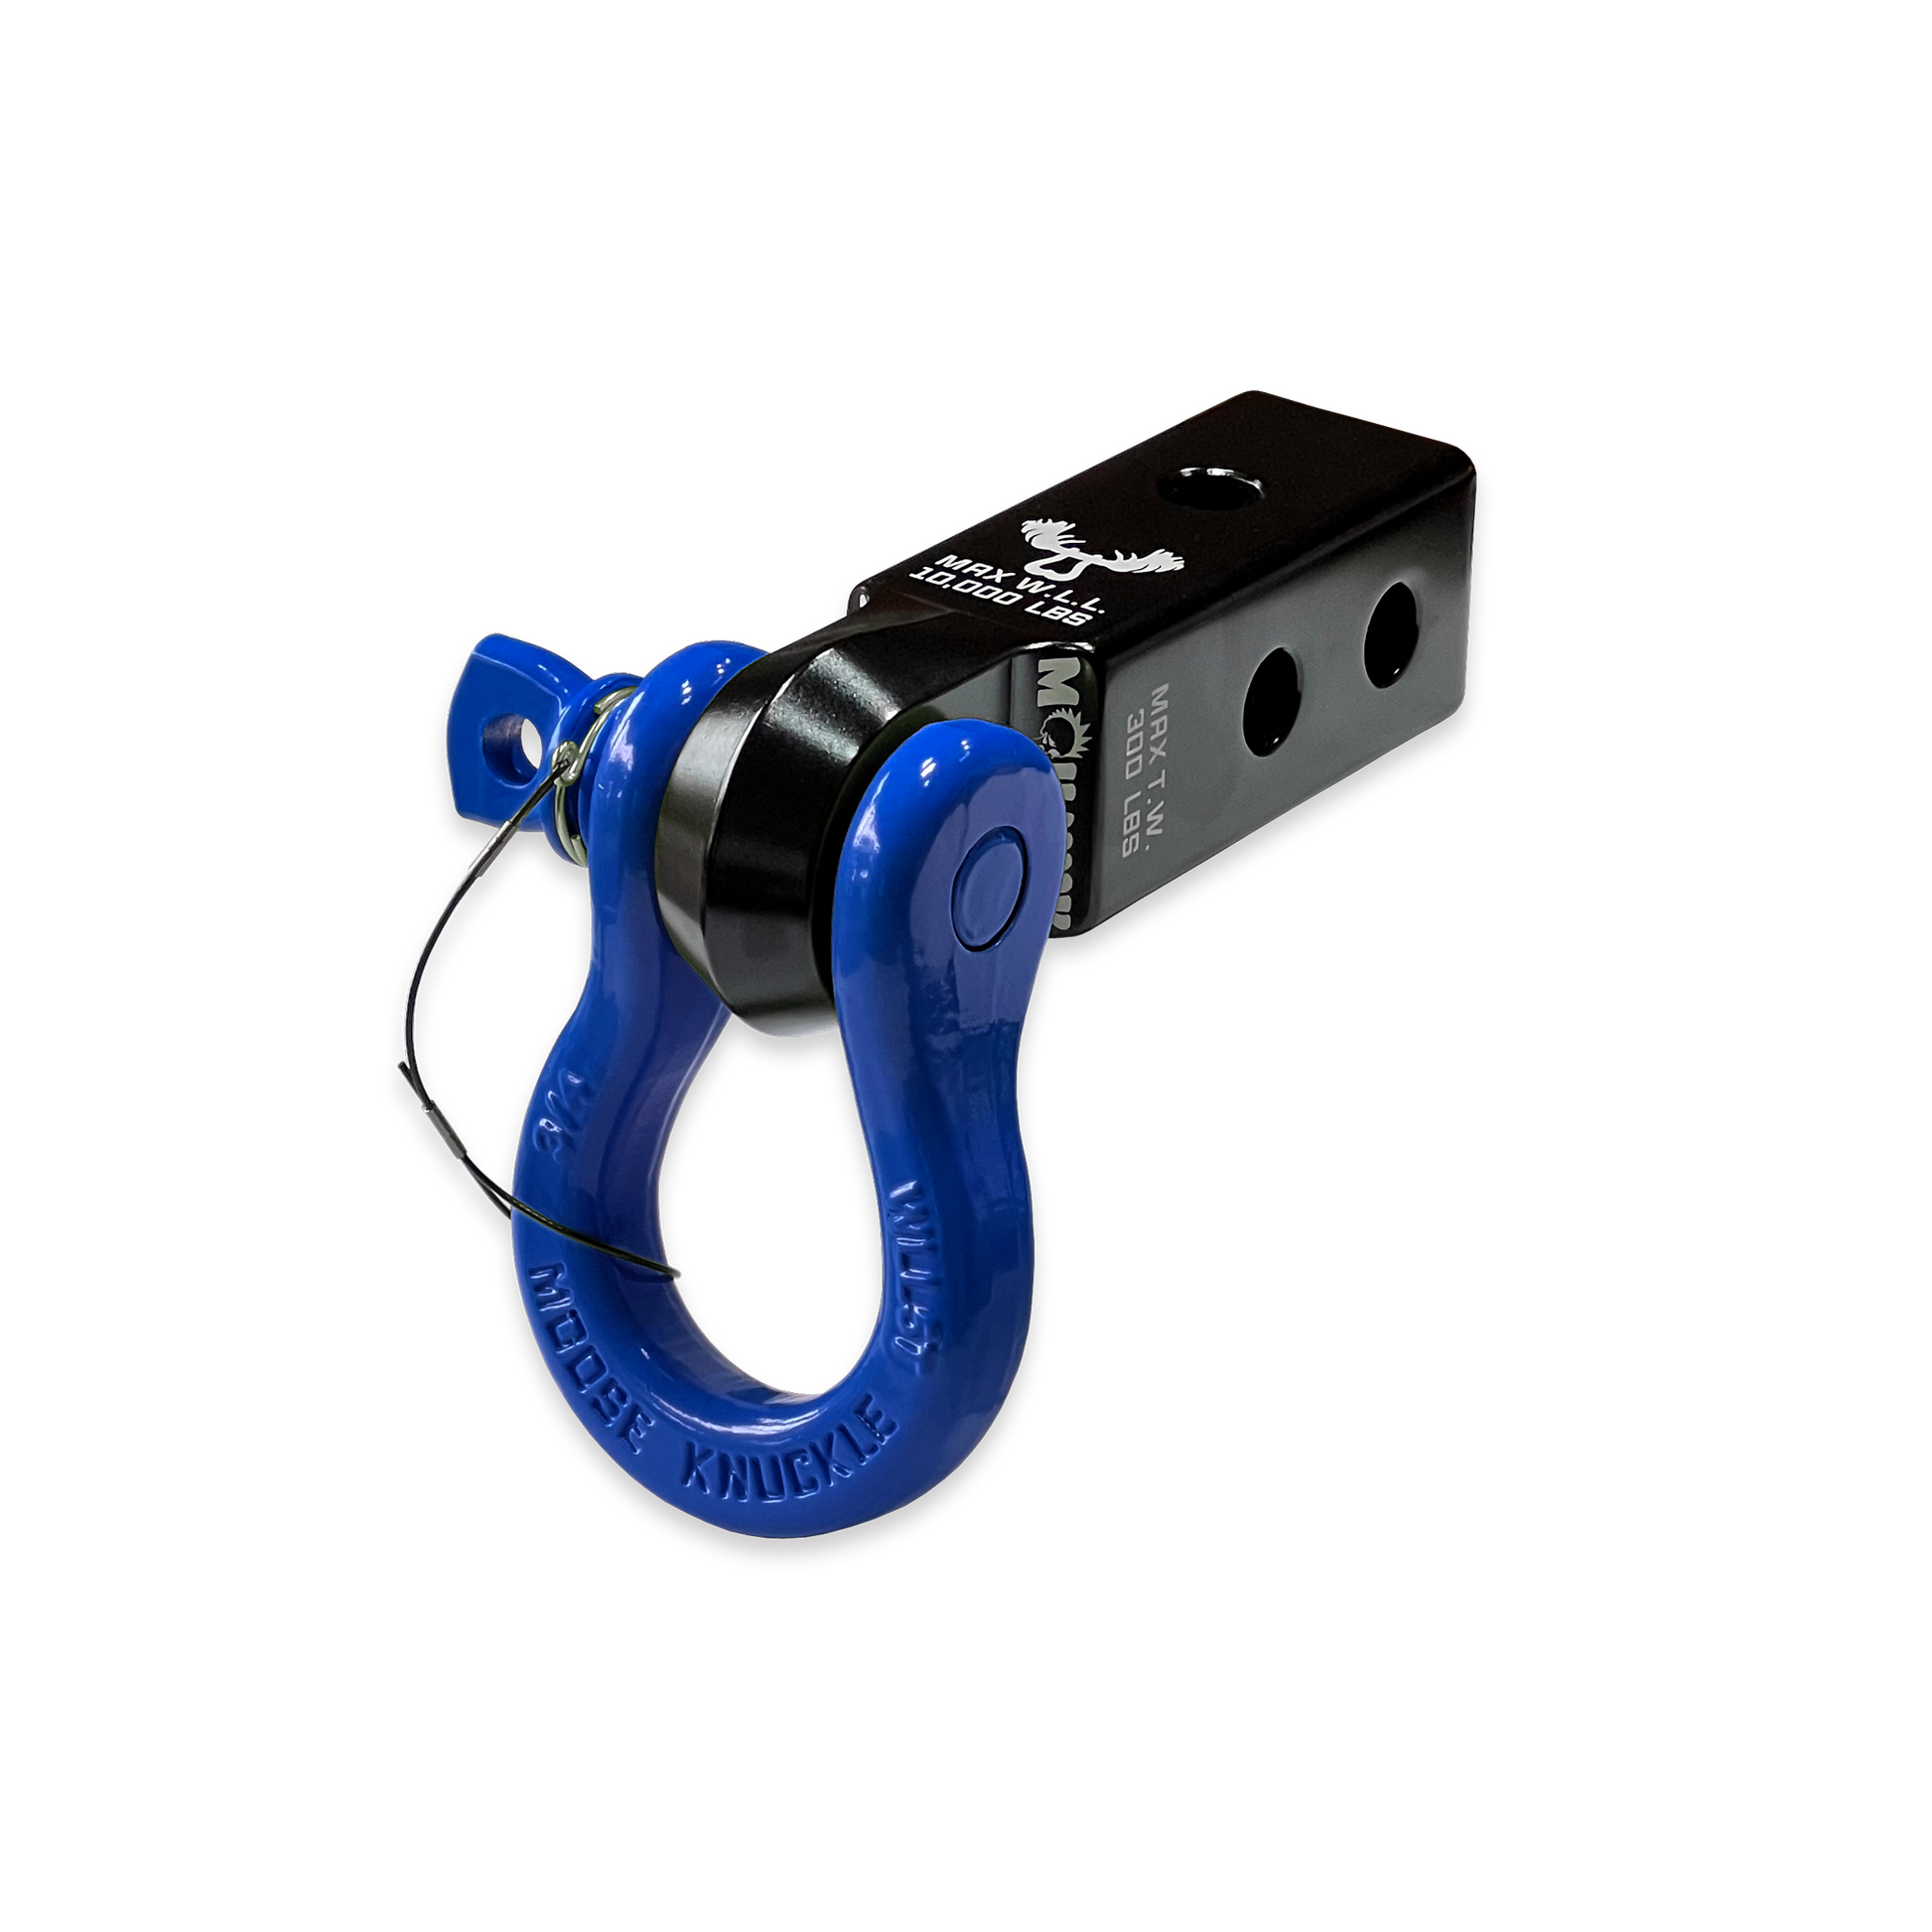 B'oh 3/4 Pin Shackle & 2.0 Receiver (Black and Blue Combo)